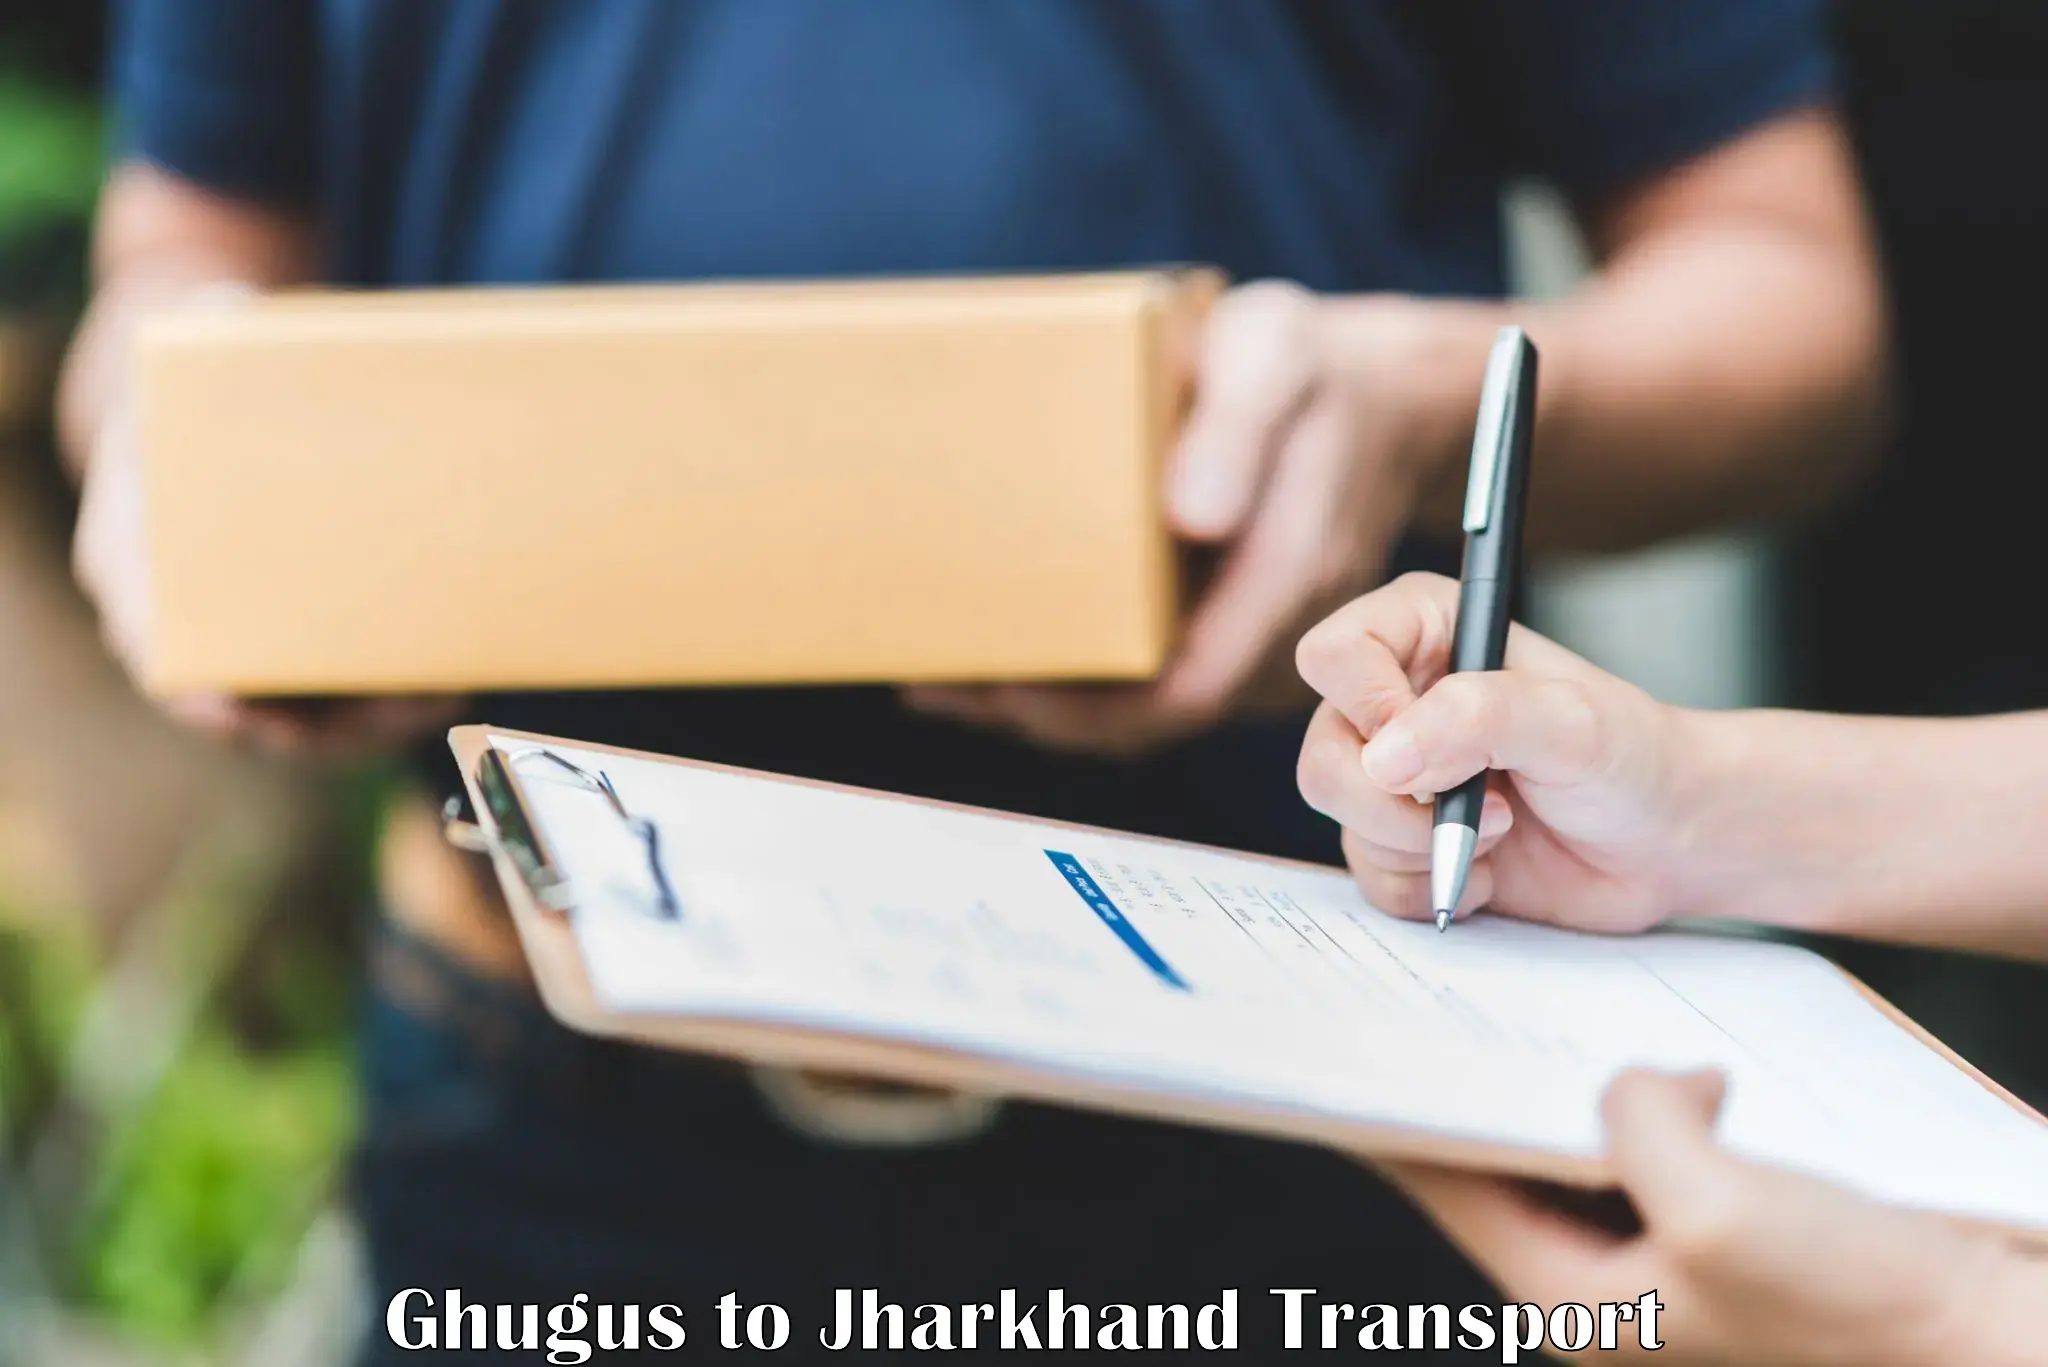 Truck transport companies in India Ghugus to Nirsa